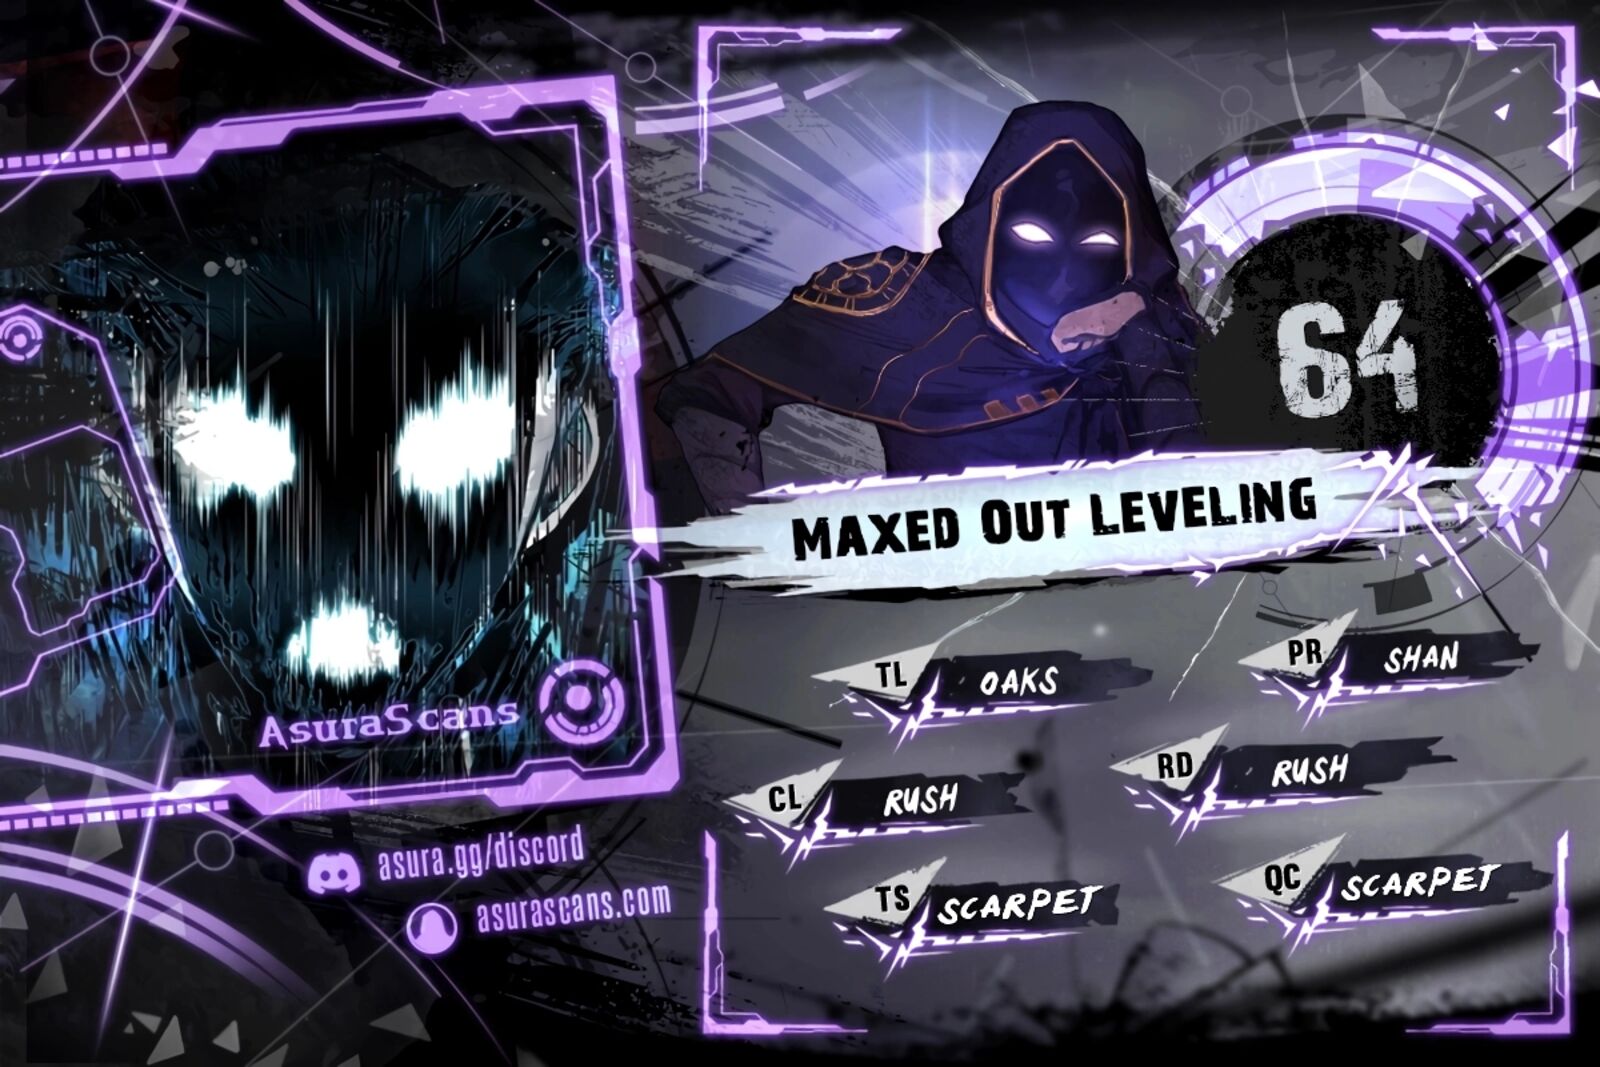 Maxed Out Leveling 64 1